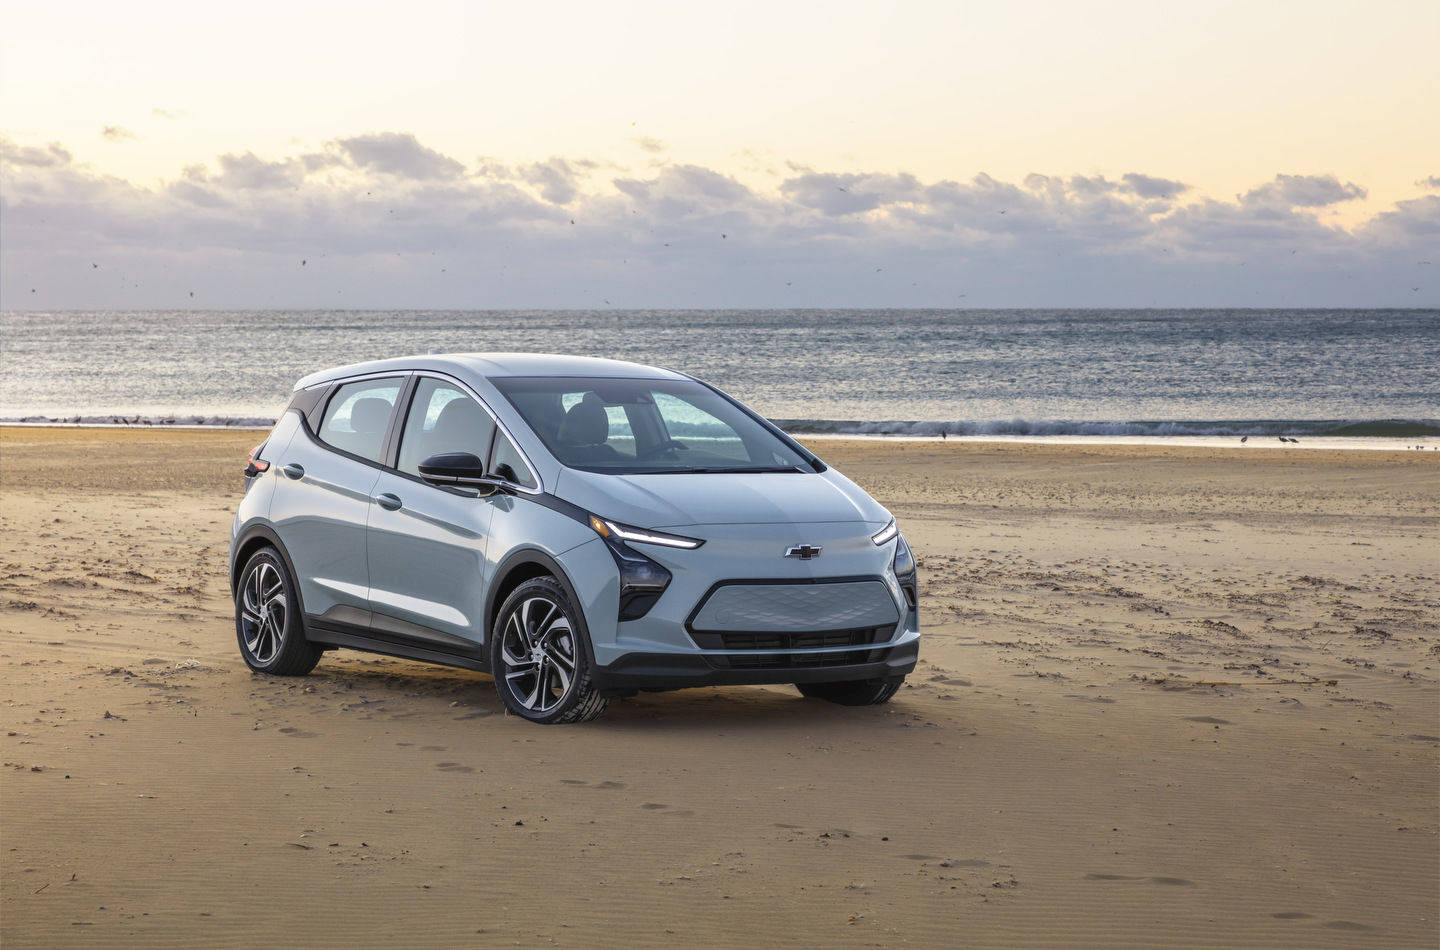 Why is the 2022 Chevrolet Bolt still the most relevant?